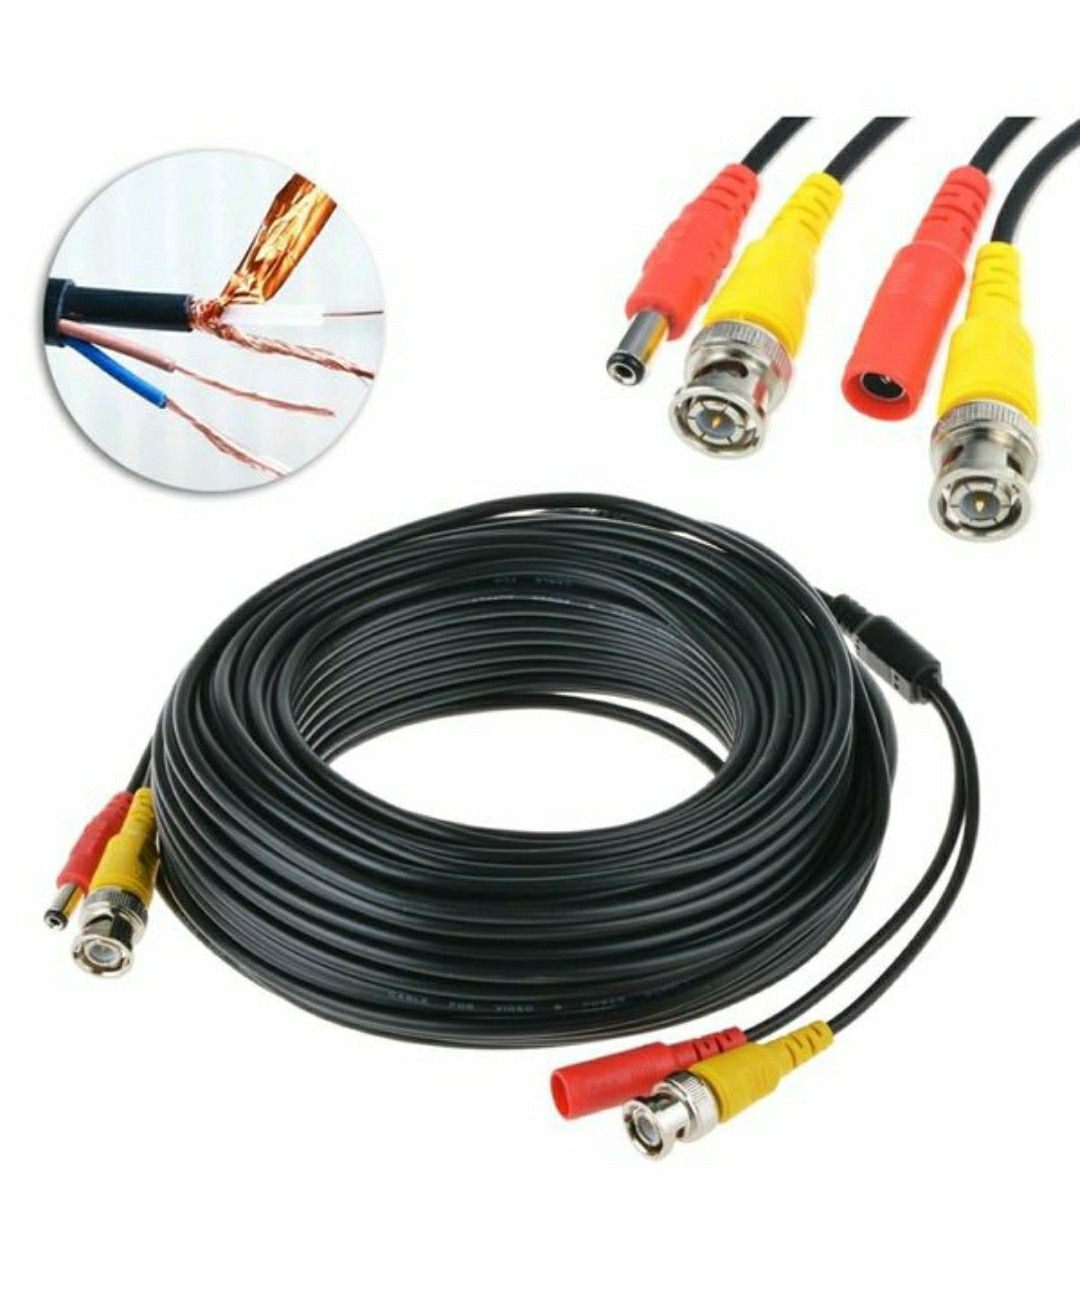 Security Camera Cable Wire Cctv Video Power 60ft